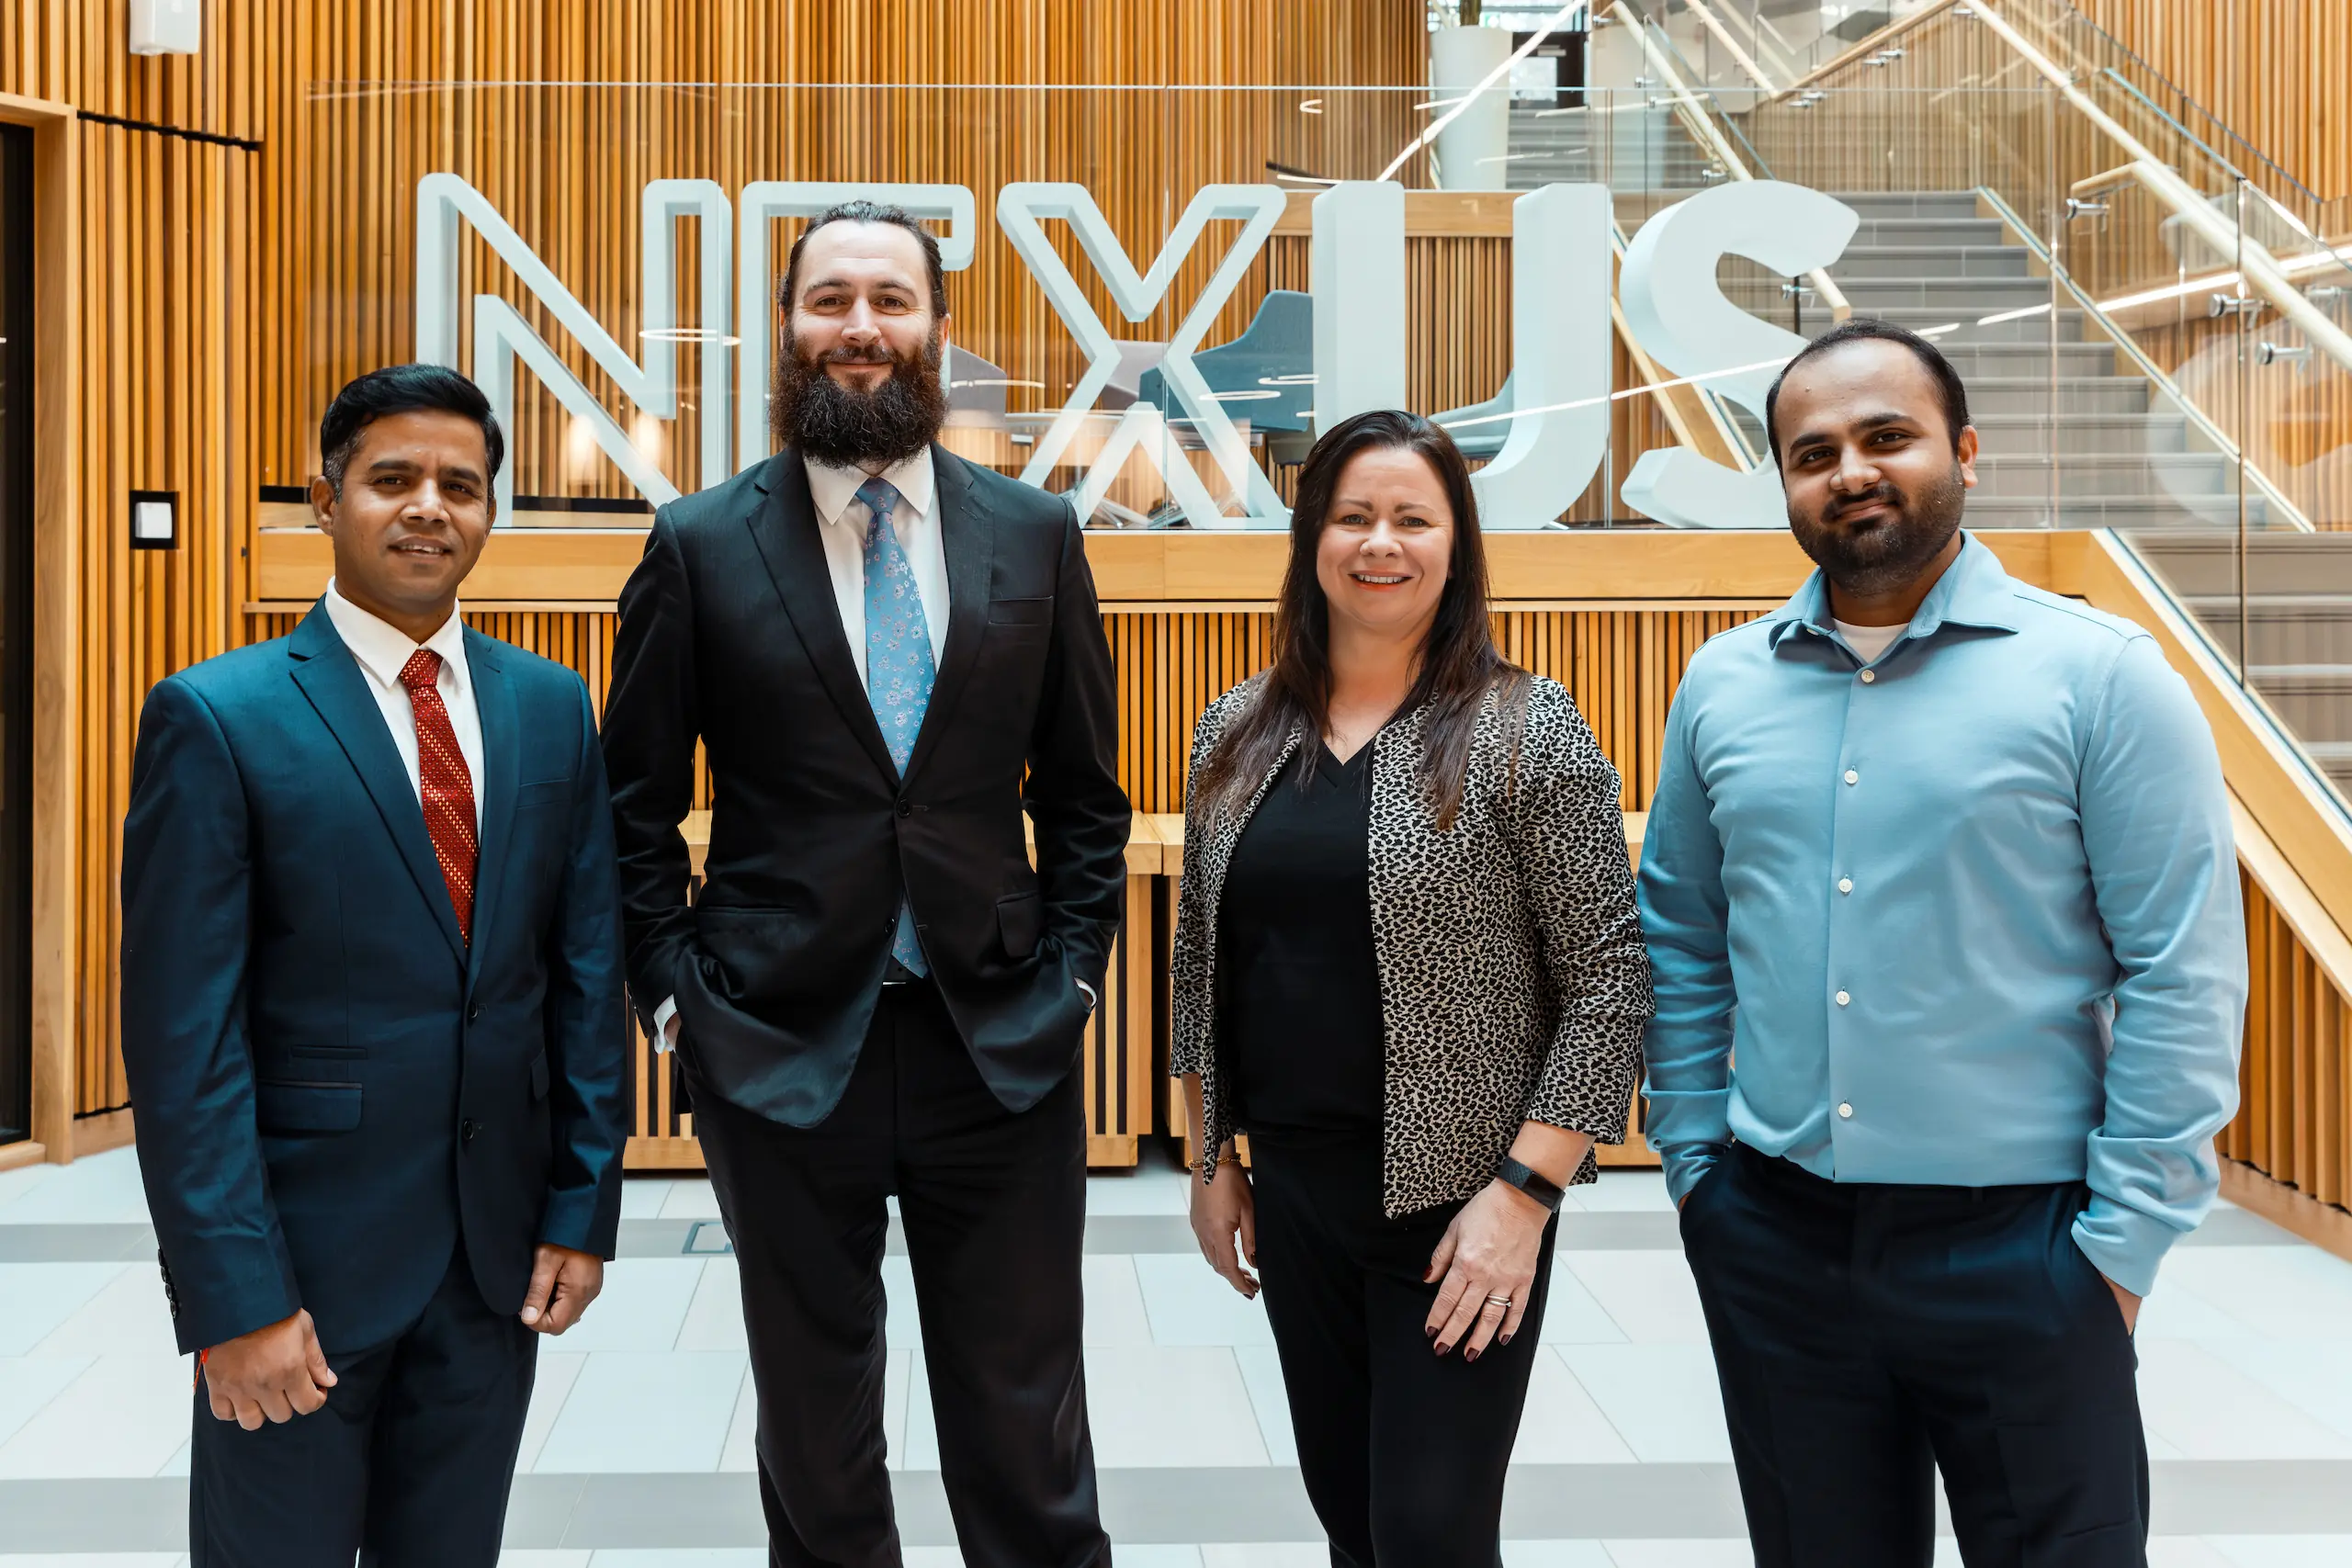 Four people standing in front of NEXUS sign and staircase.